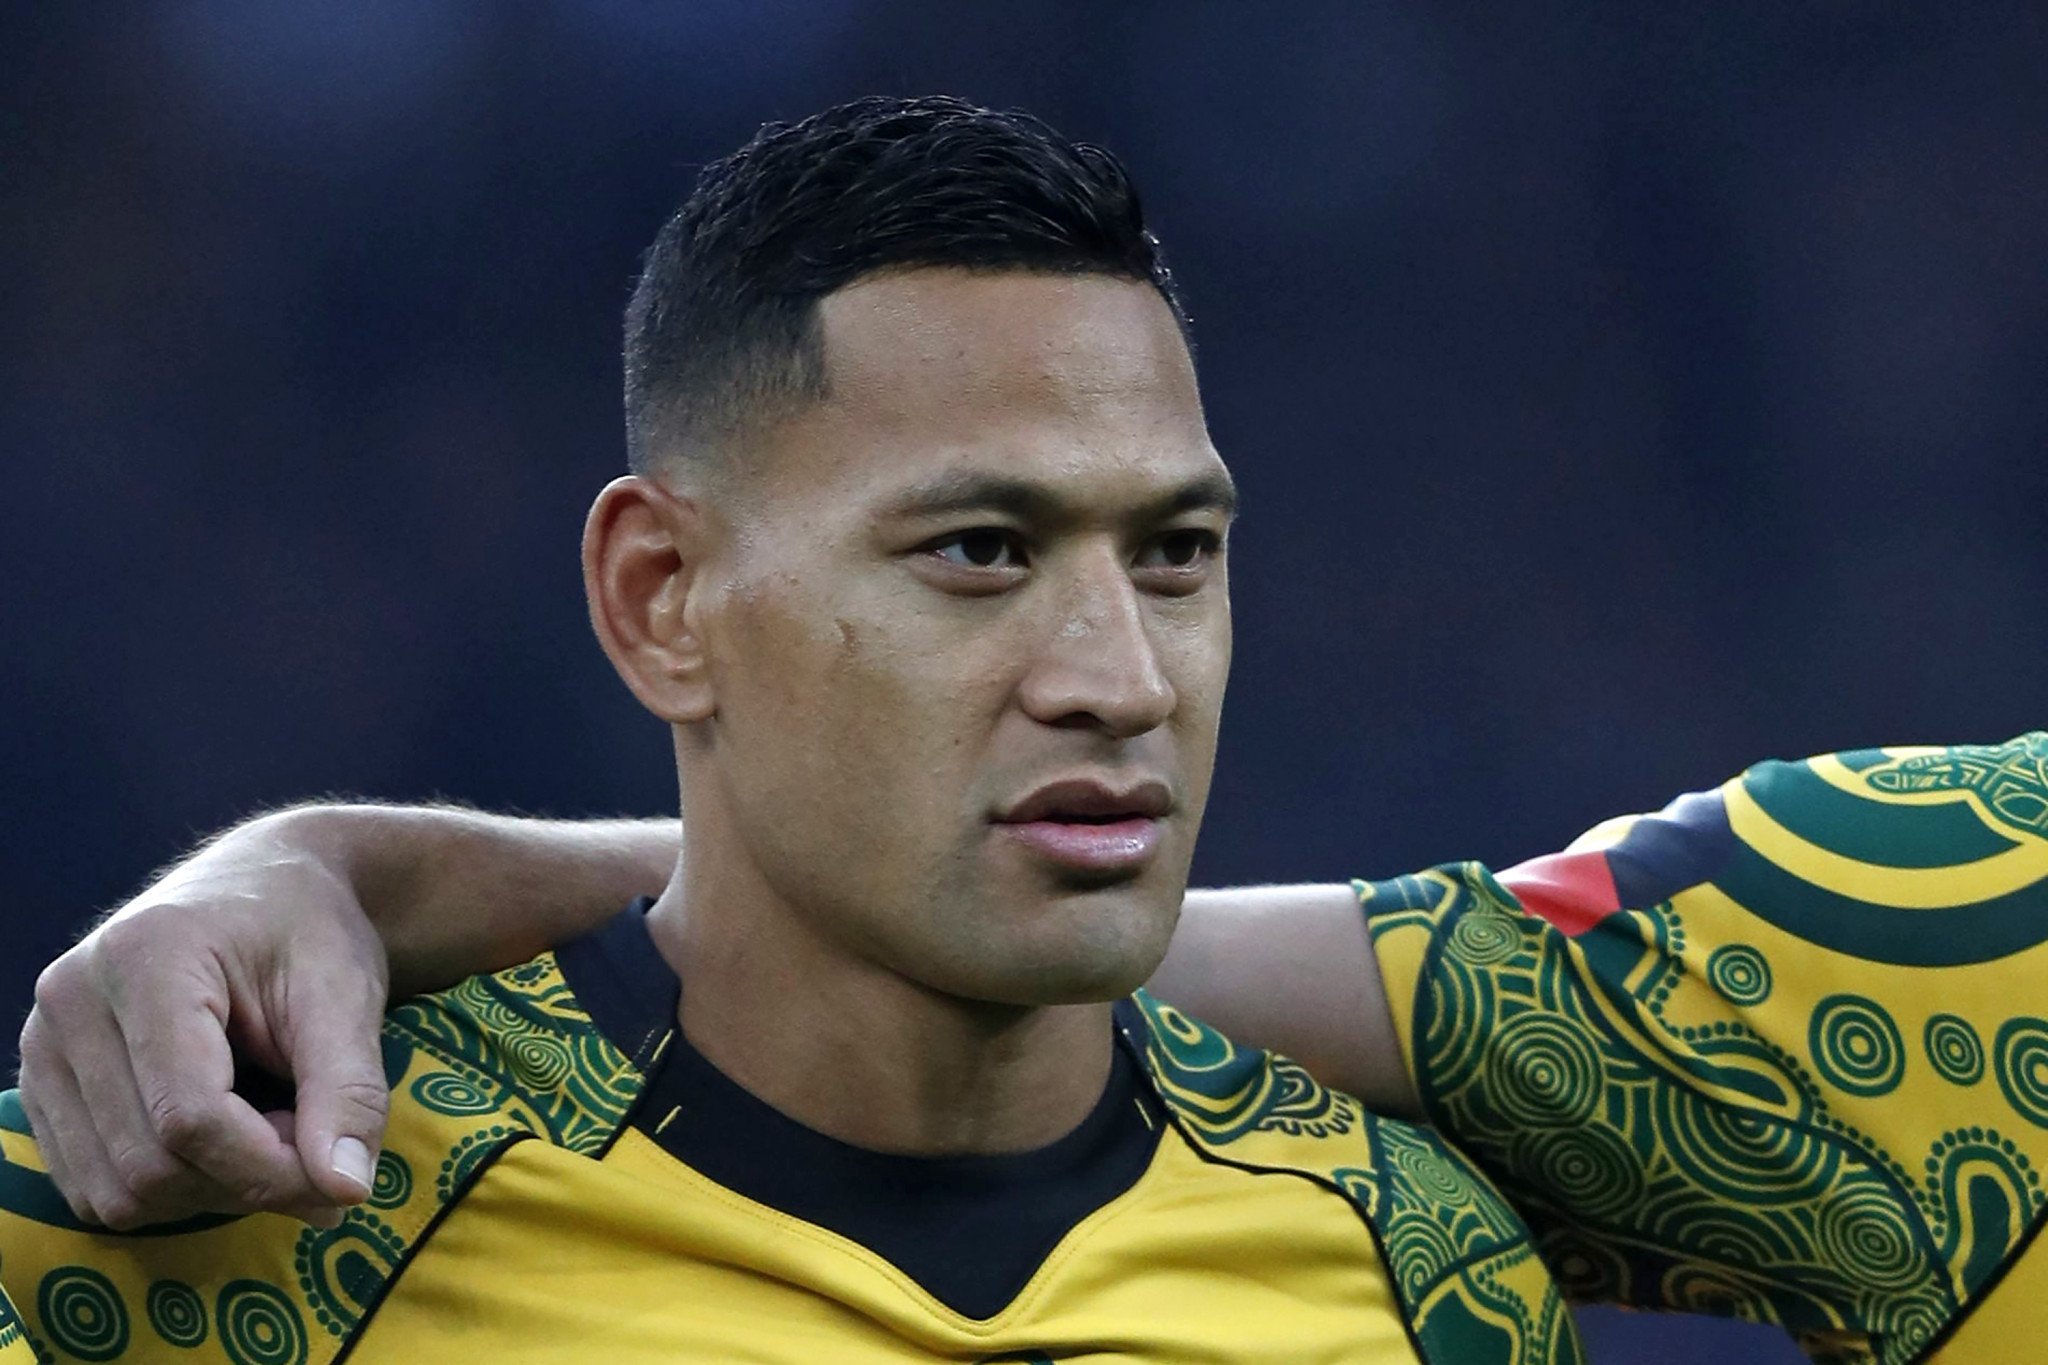 Israel Folau is formally challenging Rugby Australia's decision to end his contract over a comment on social media about homosexuals ©Getty Images